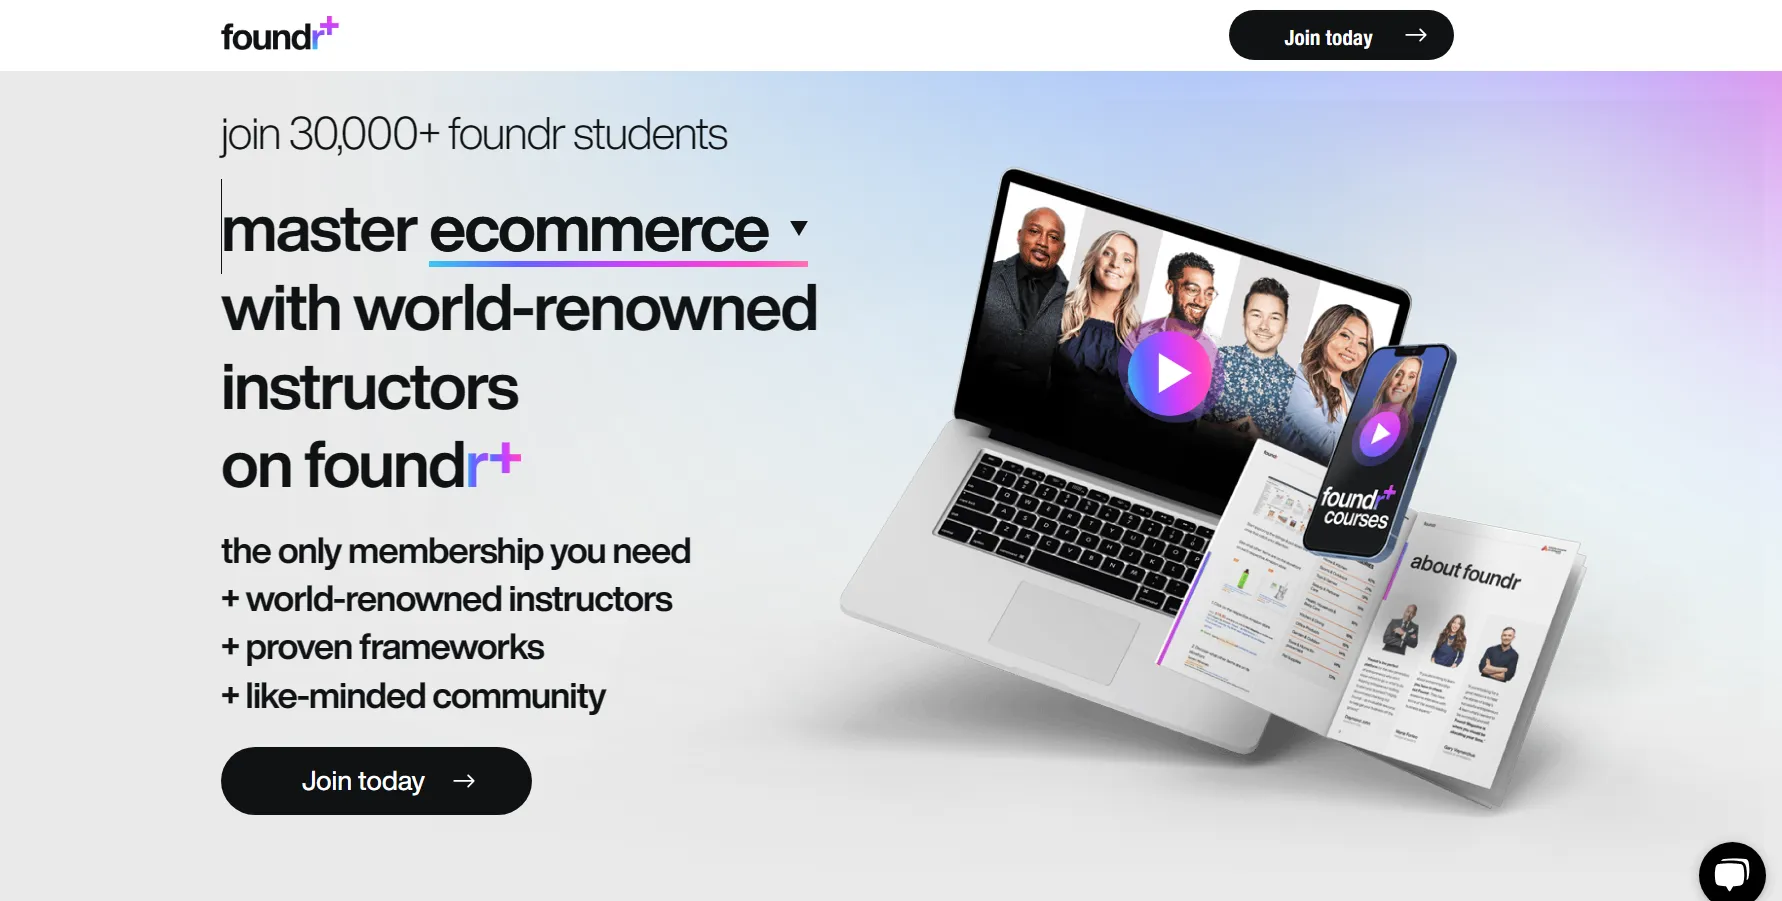 From Foundr to Foundr+: Top Reasons To Enroll For Foundr+